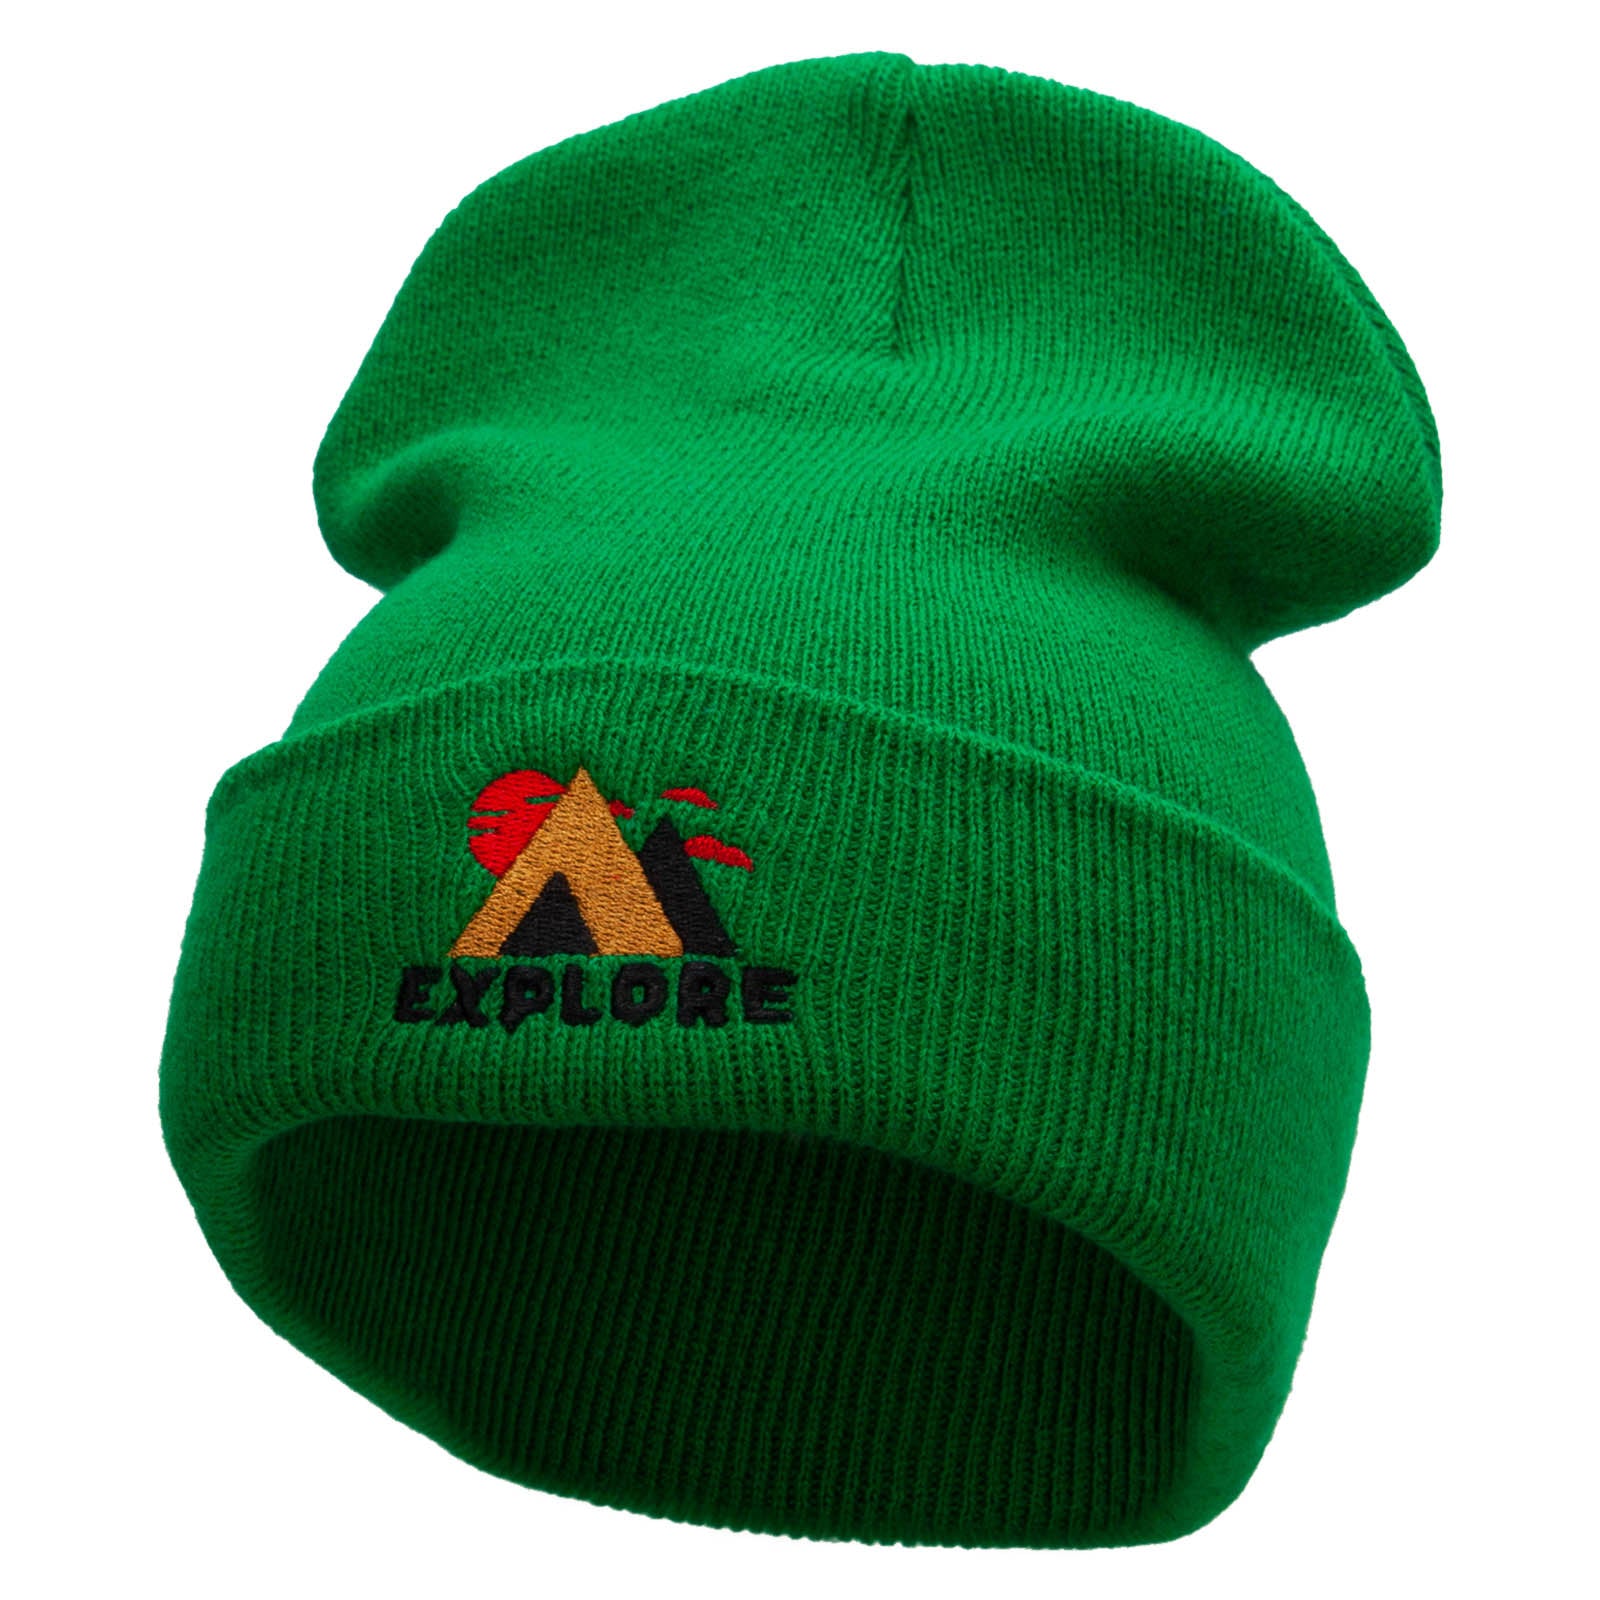 Explore Embroidered 12 Inch Solid Long Beanie Made in USA - Kelly Green OSFM